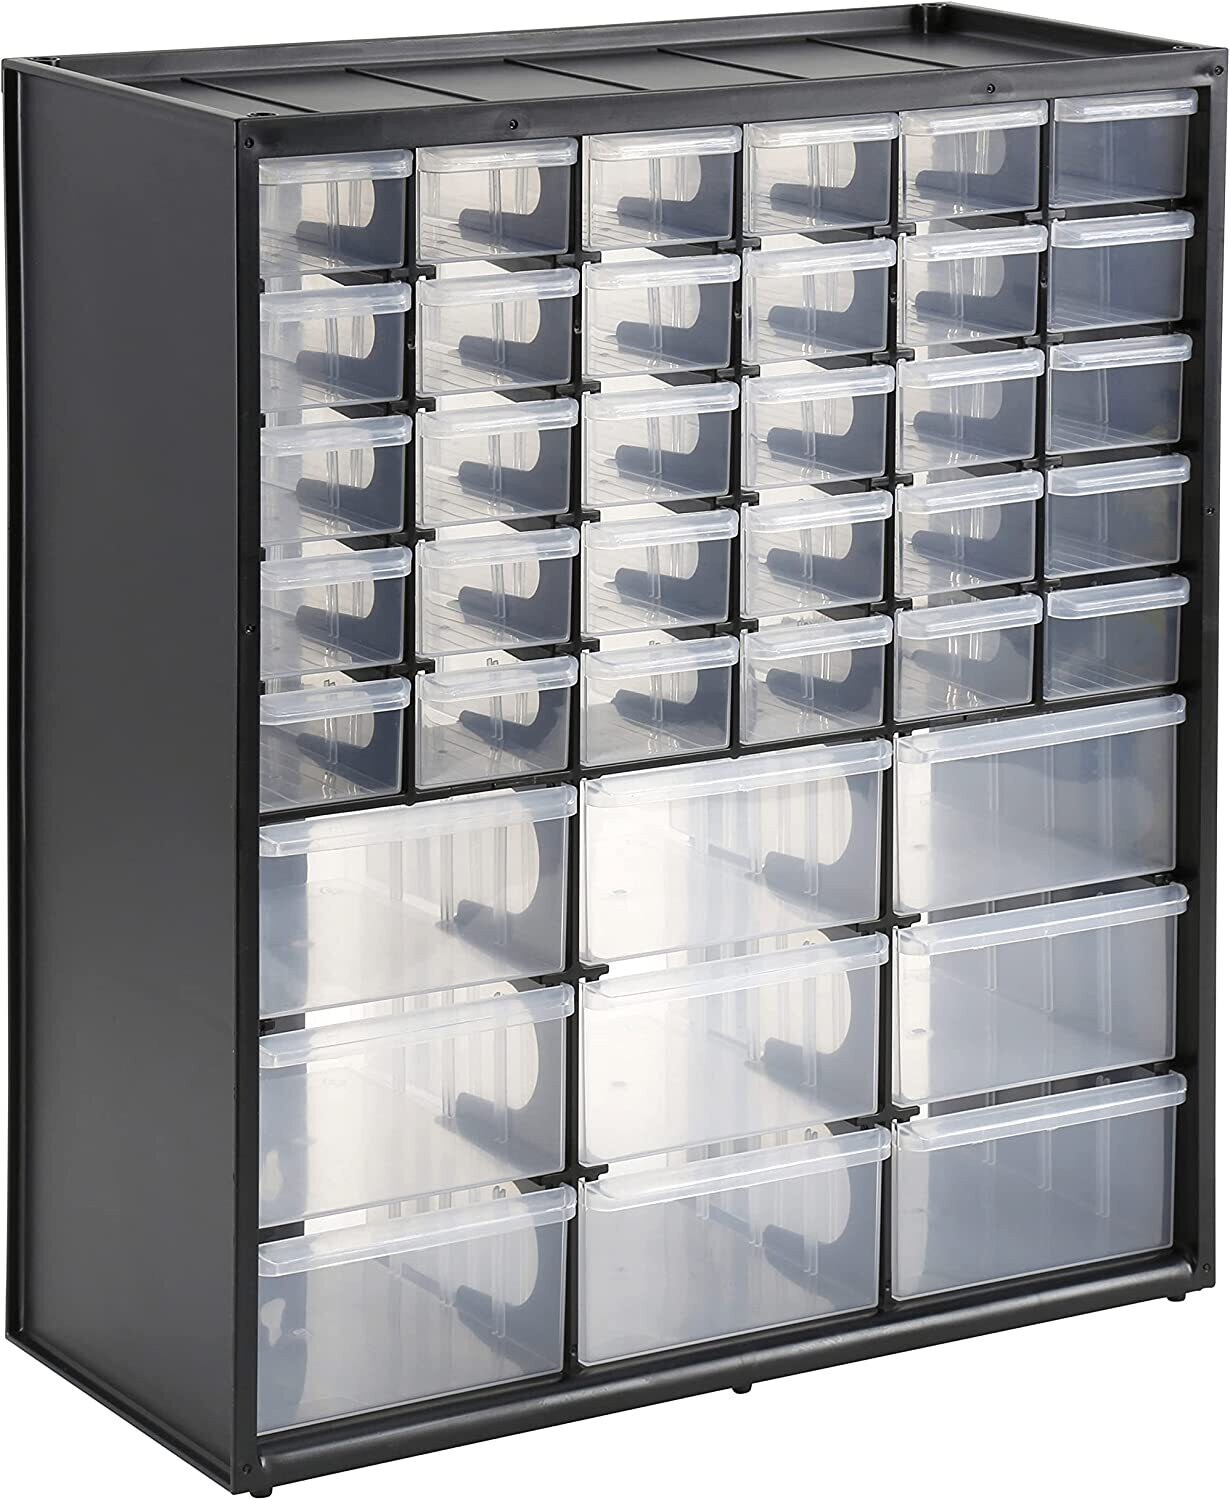 Storage Box with 39 Drawers, Dimensions 36.5 x 43.5 x 15.5 cm - Suitable for Wall Mounting